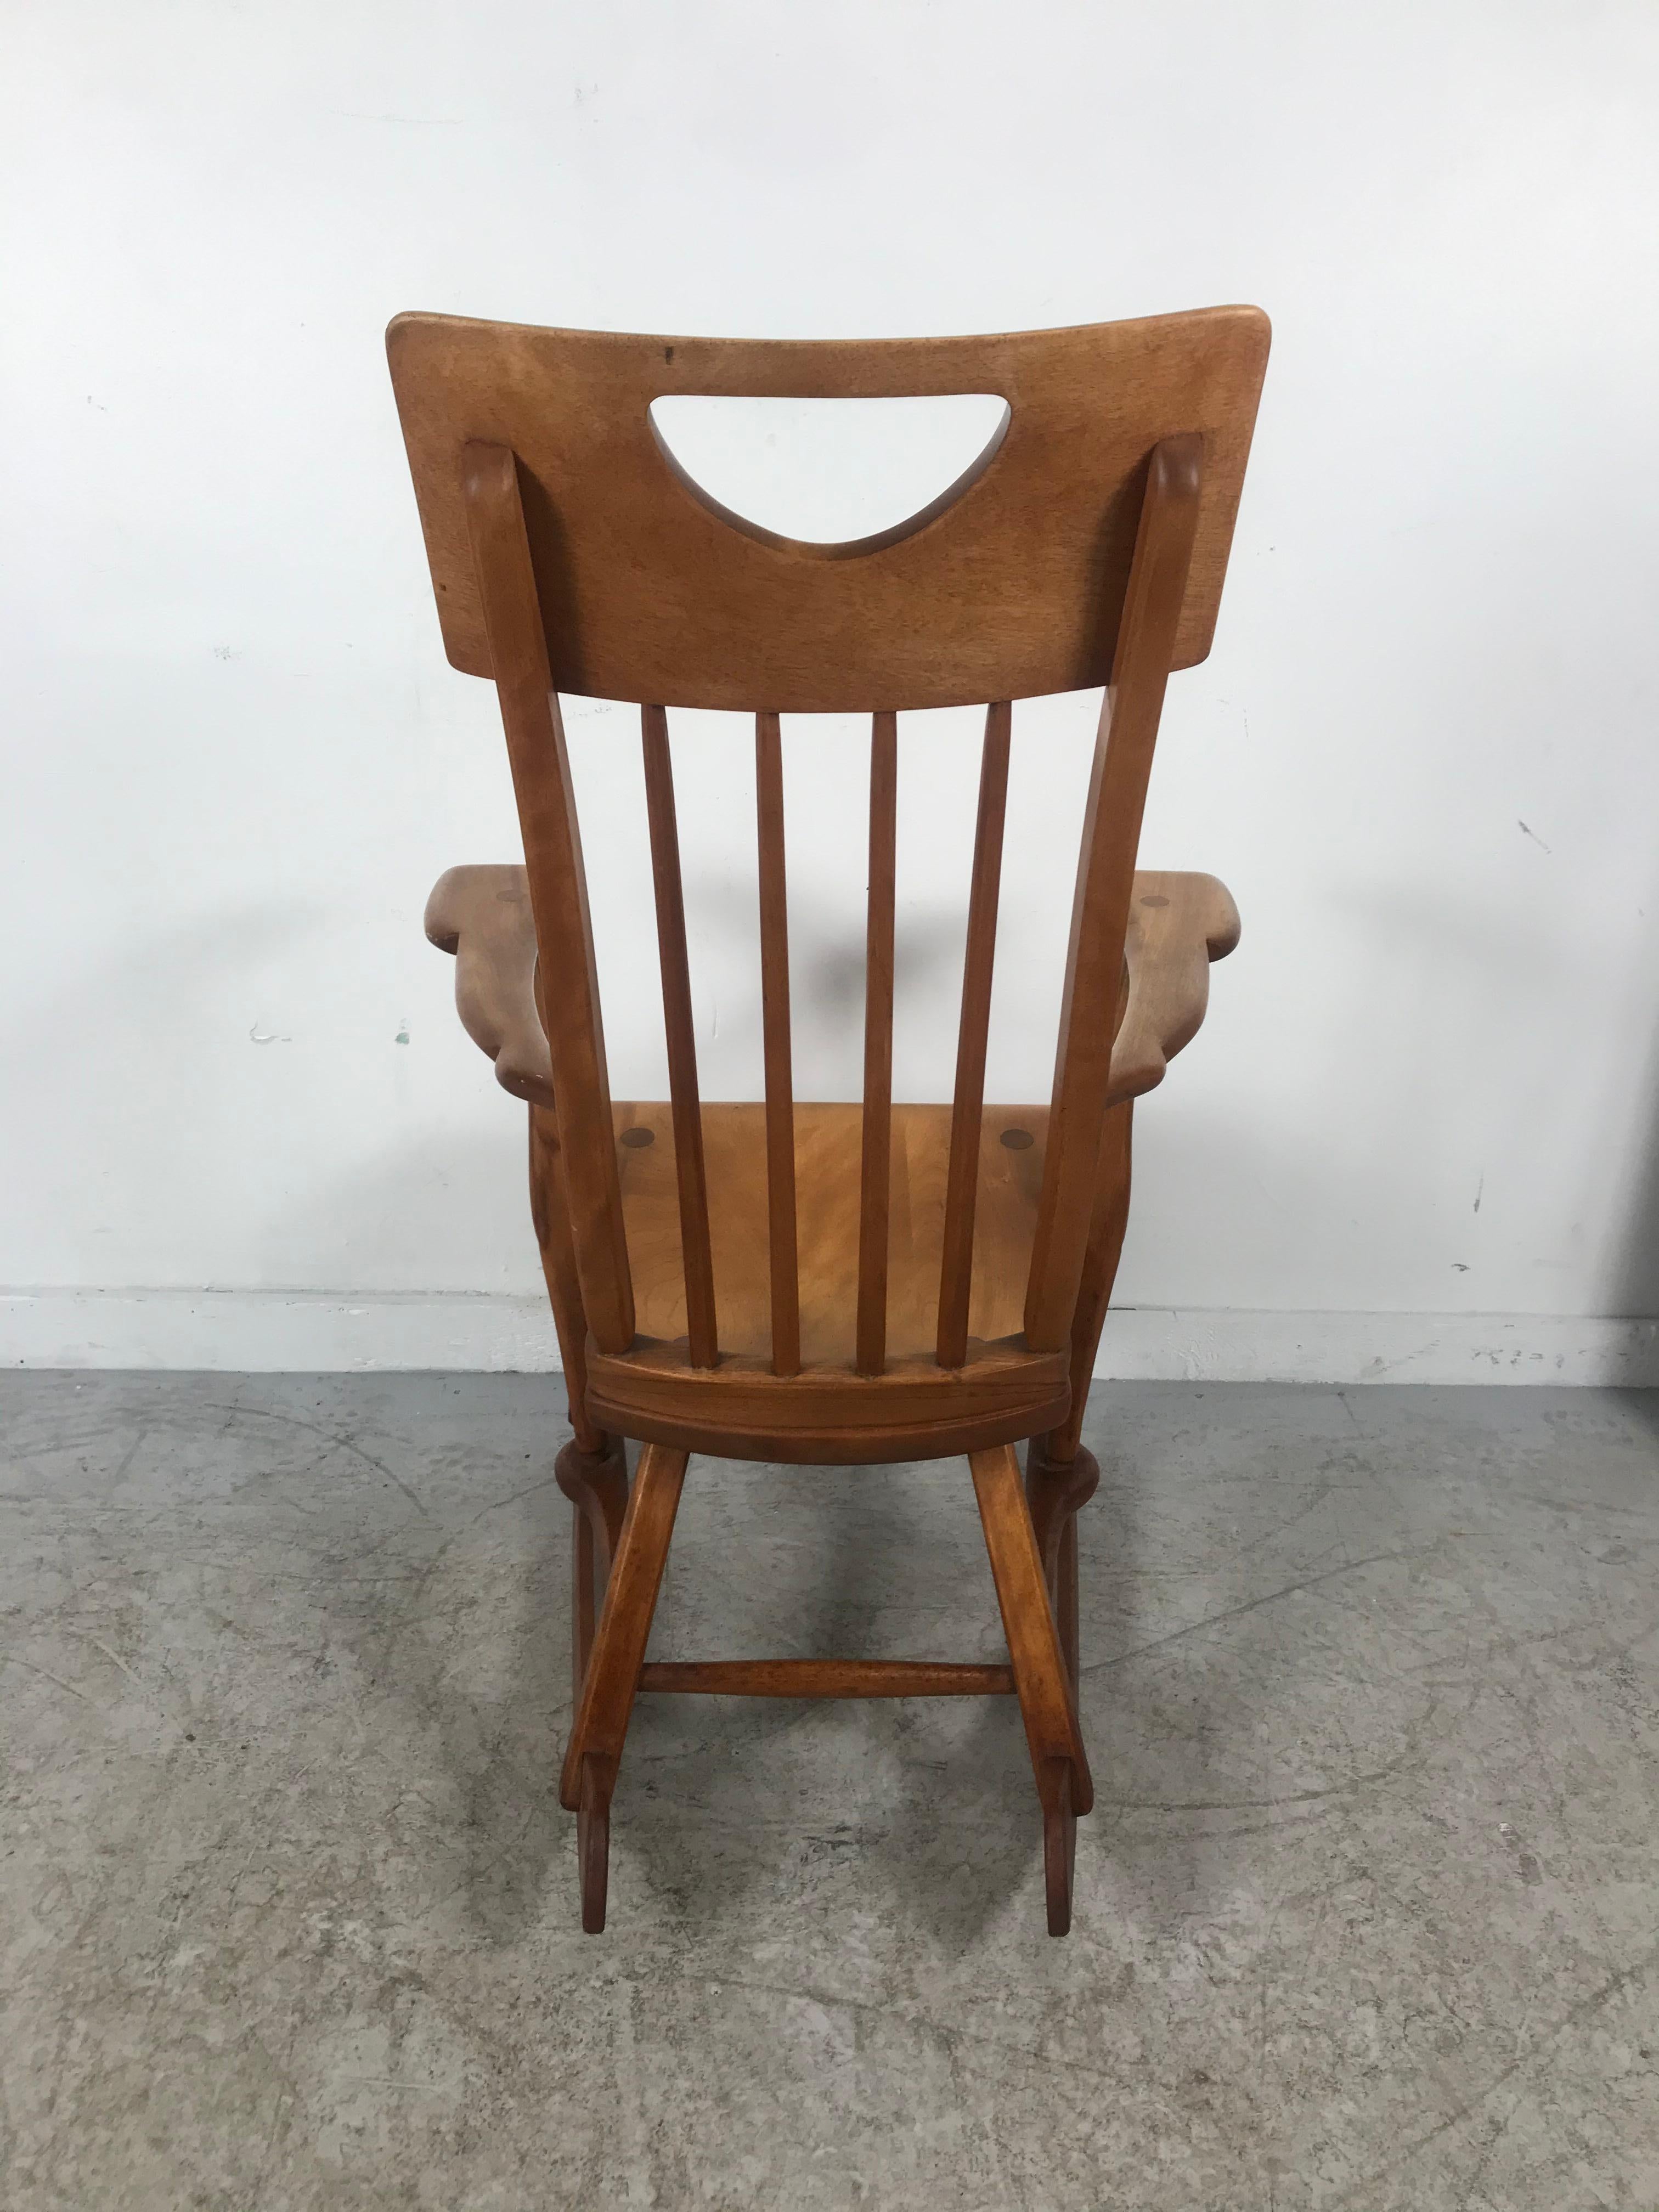 American Colonial Modernist Solid Maple Rocking Chair, Attrib Sikes Chair Co 1